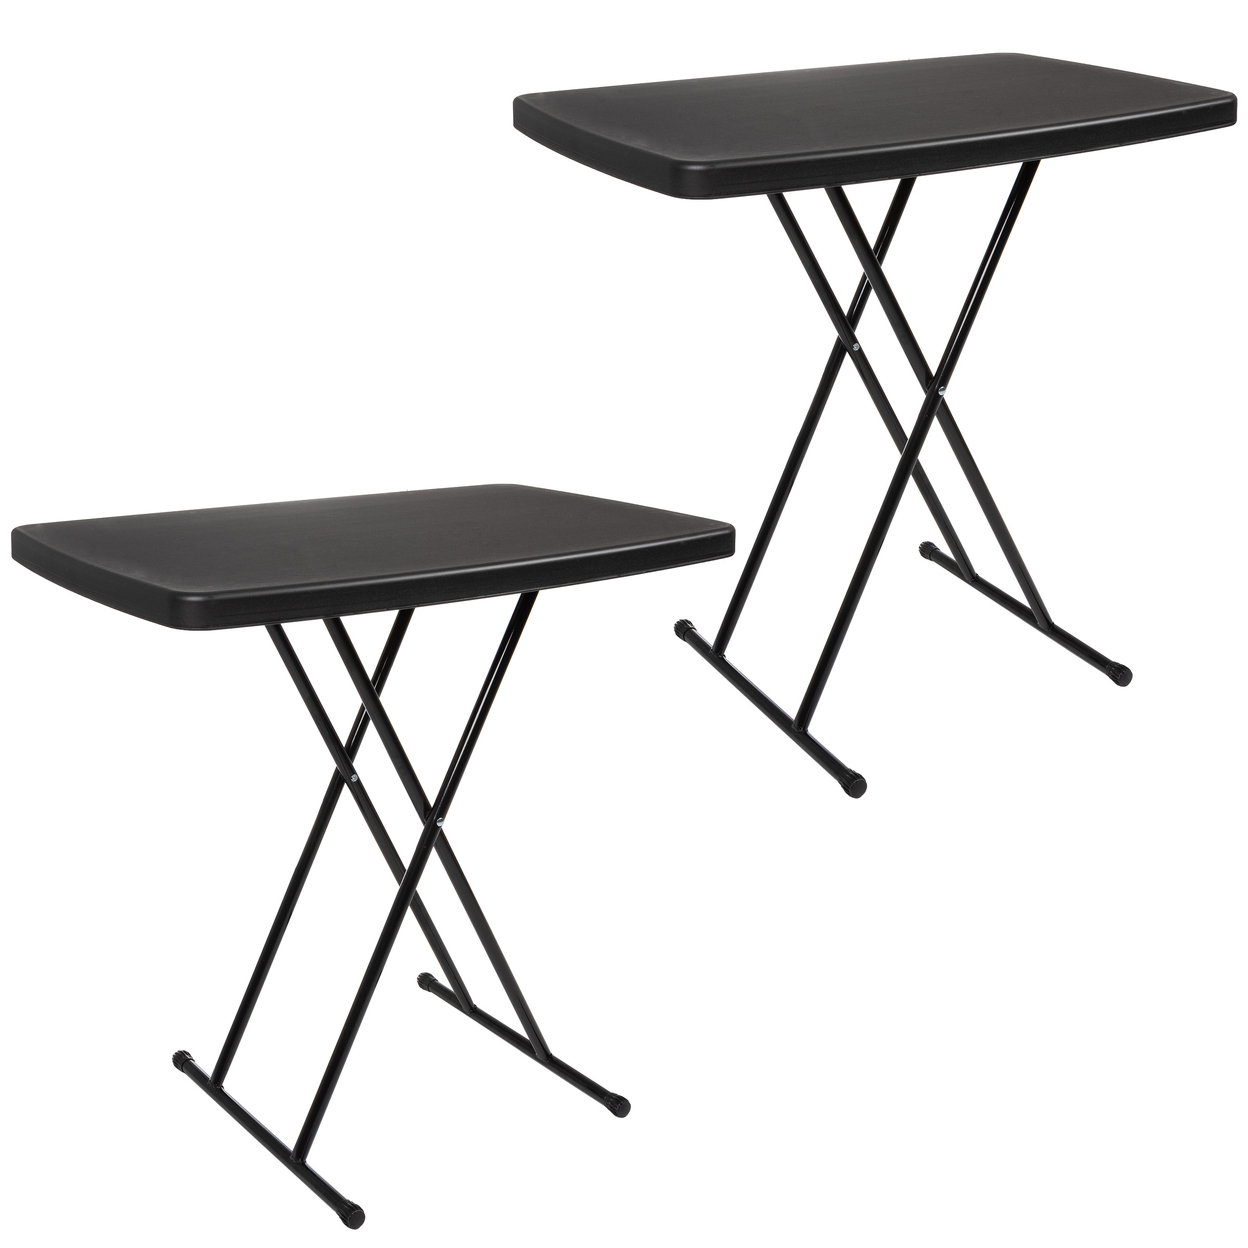 Folding Table Set 2 Lightweight Portable Tables Small Plastic Desk For Camping